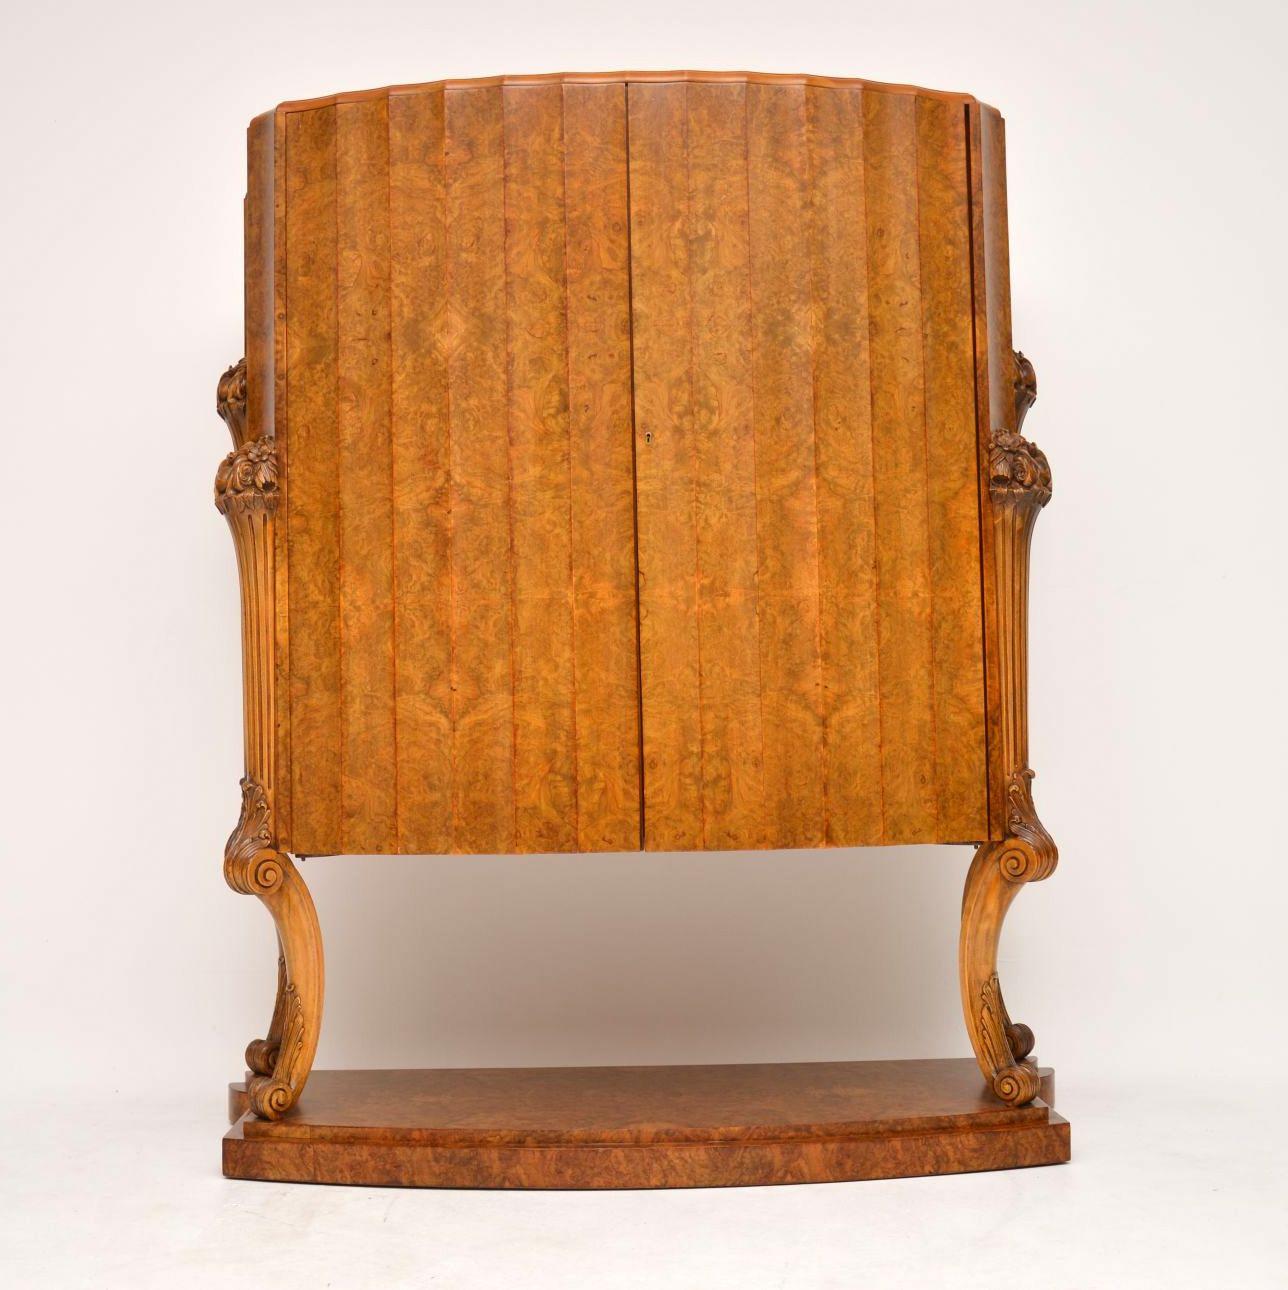 A magnificent and rarely seen original Art Deco period cocktail cabinet in burr walnut, this was designed and made by Harry & Lou Epstein in the 1930s. It is of amazing quality, with stunning walnut veneers and beautiful floral carving. The doors